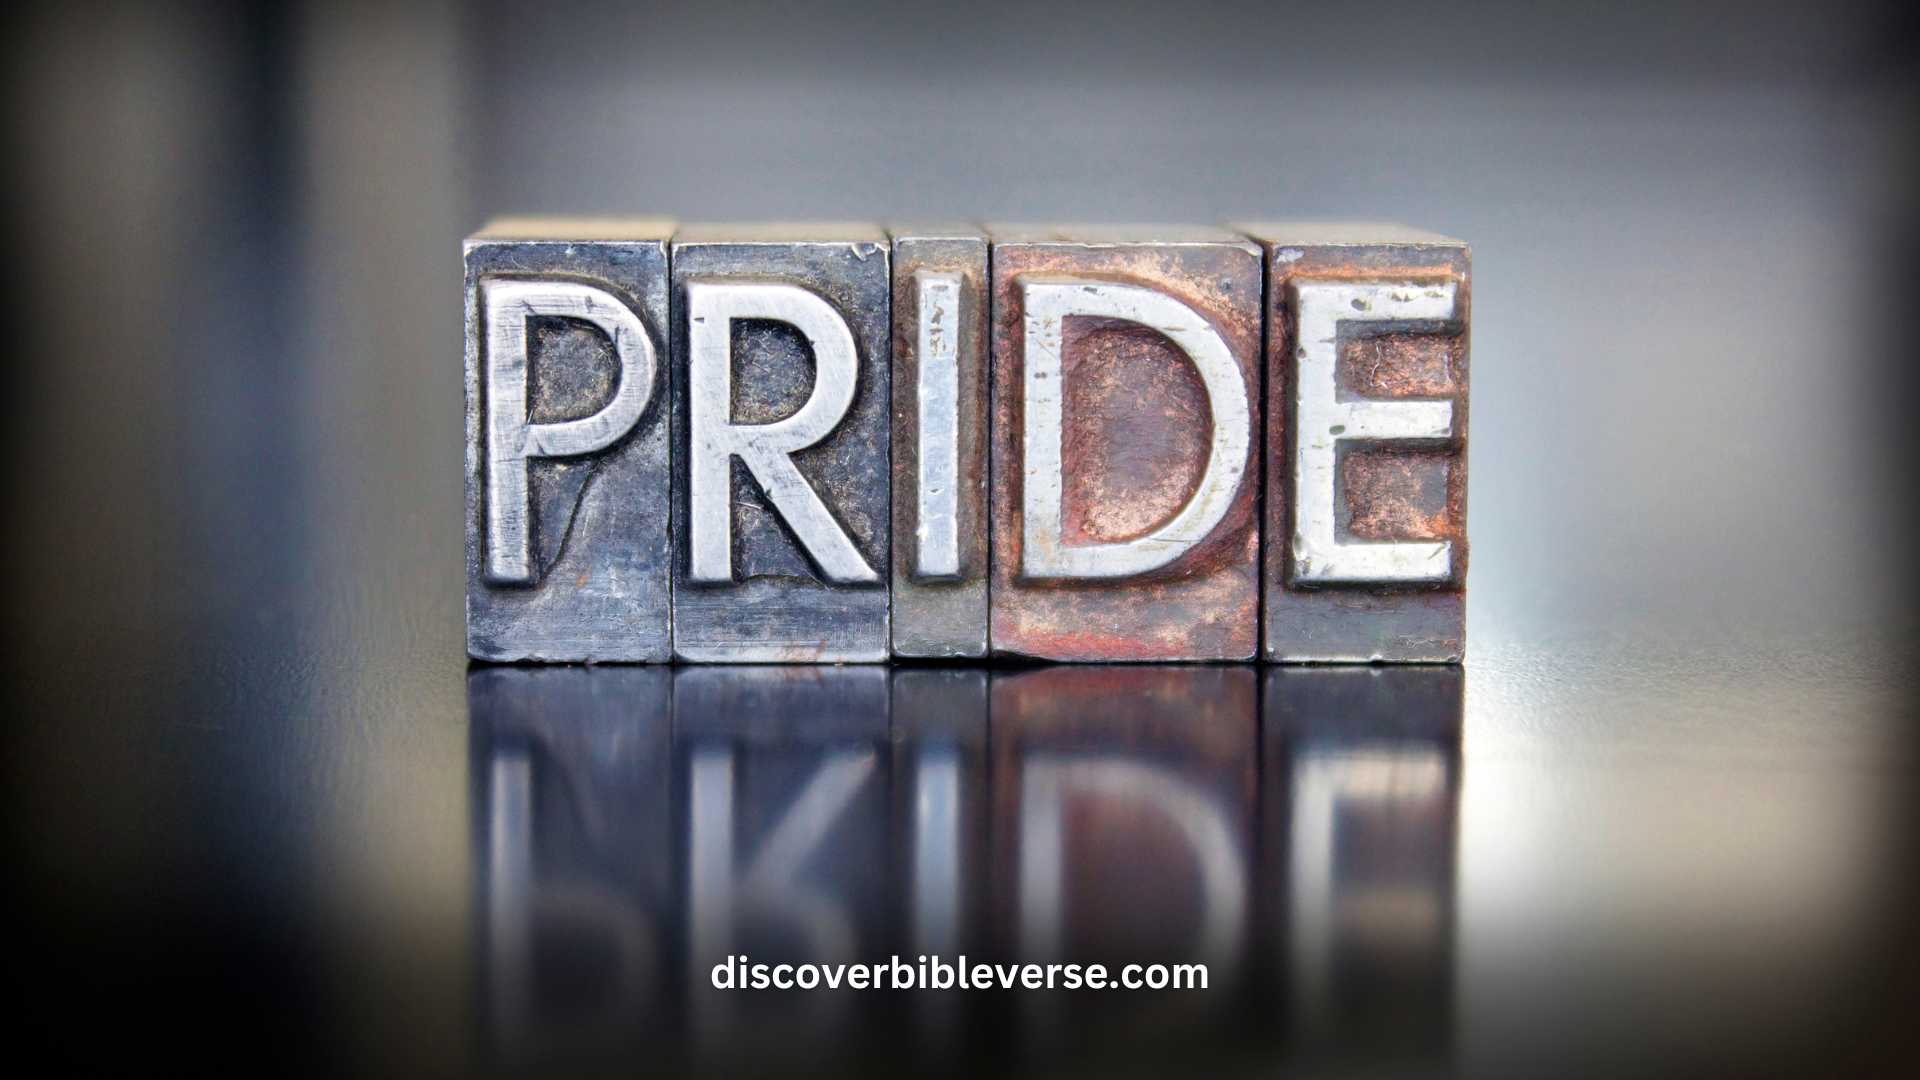 How Many Times Is Pride Mentioned In The Bible?